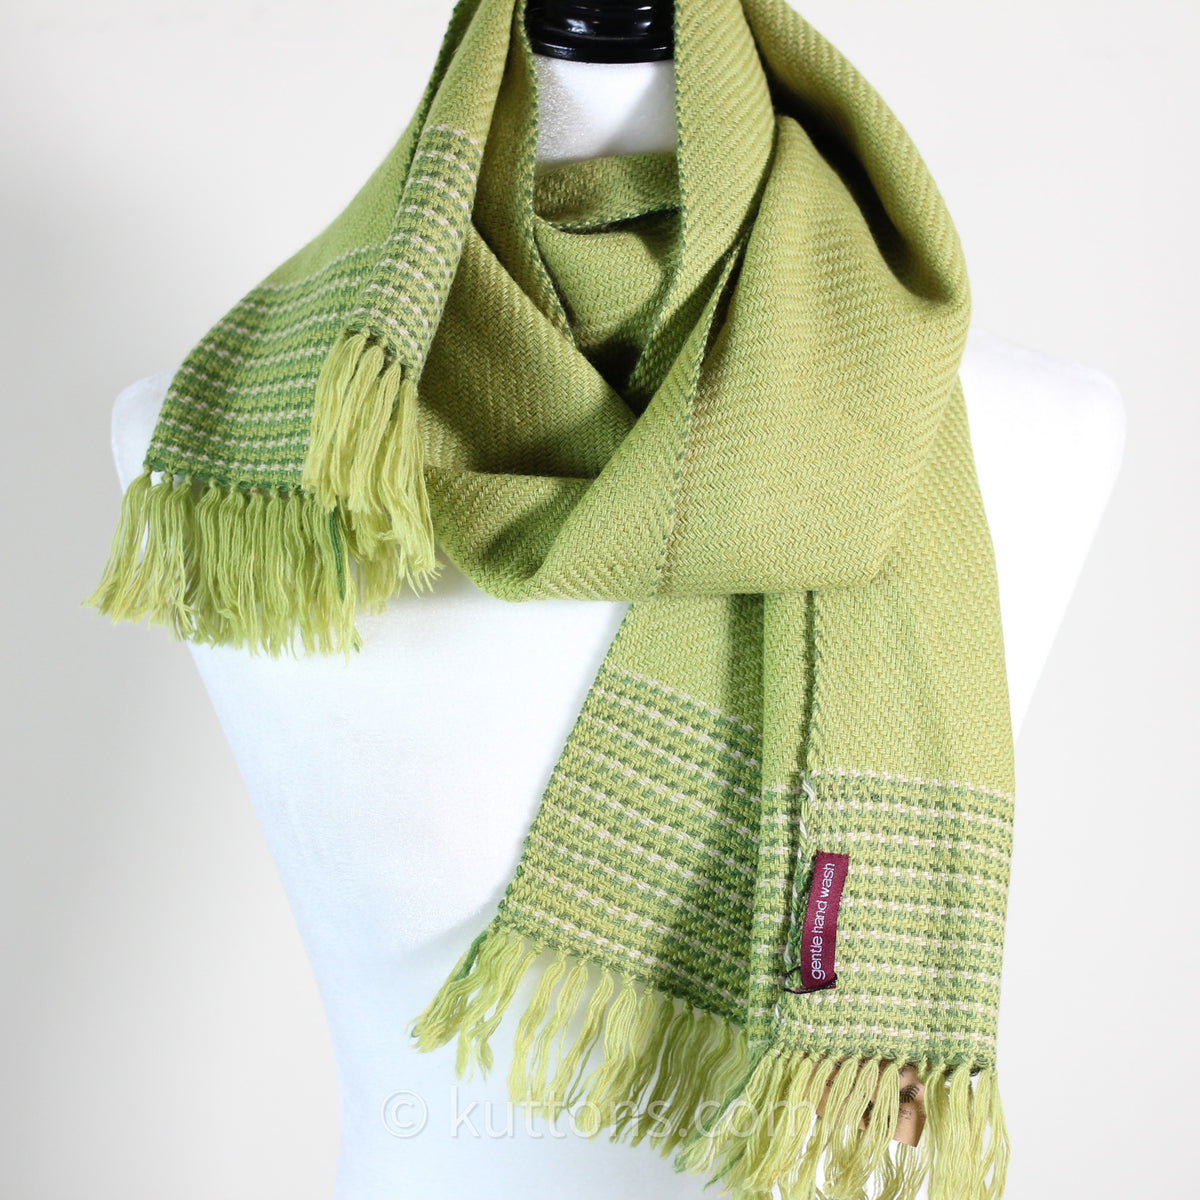 Handwoven Fine Merino & Himalayan Wool Scarf - Naturally Dyed with Tesu Flowers & Tea | Parrot Green, 13"x76"